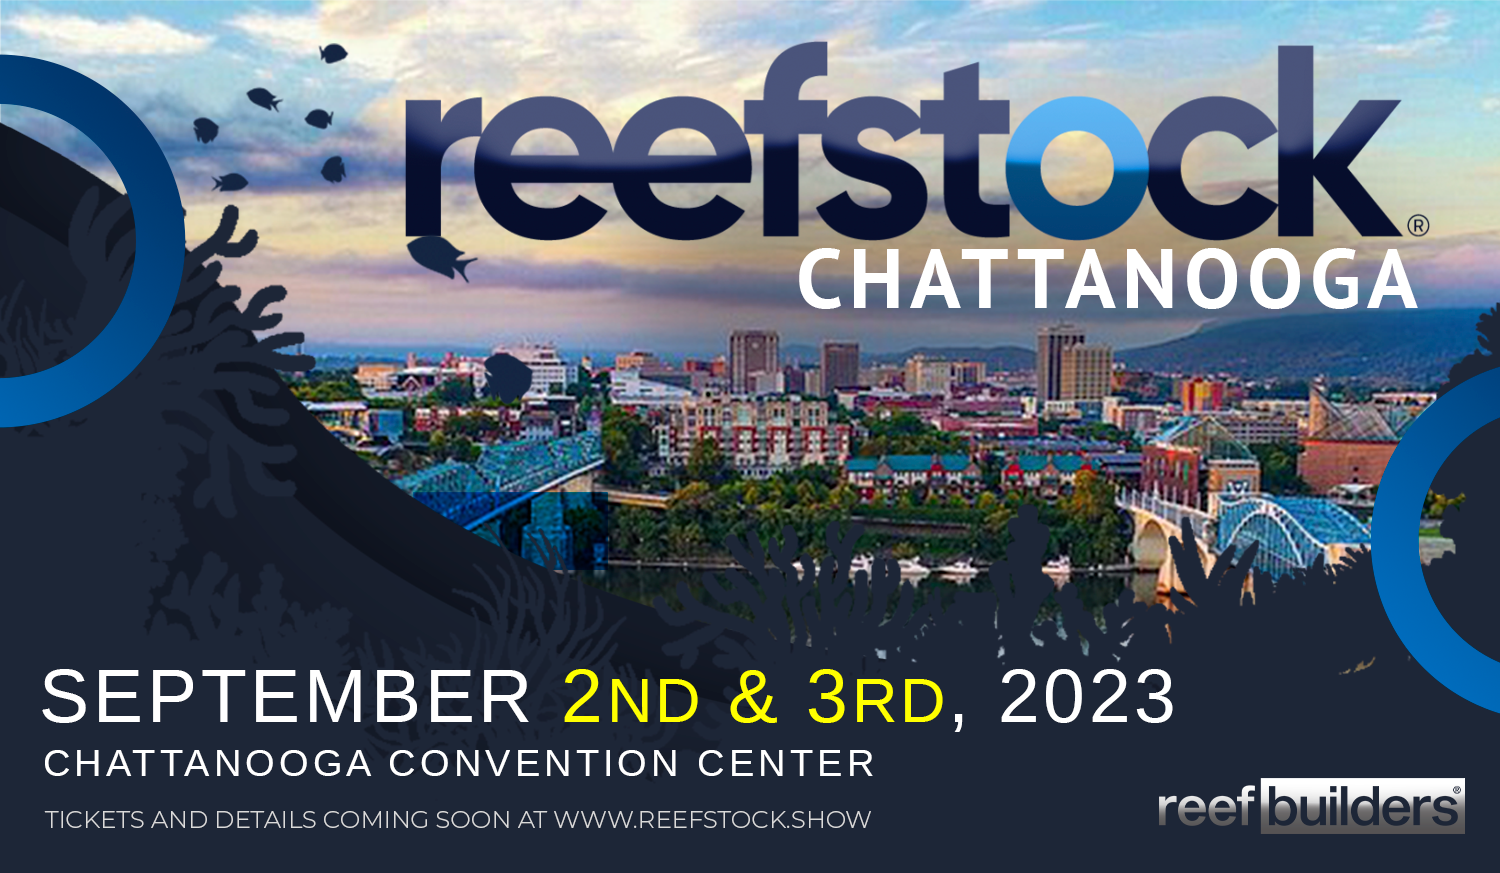 ReefStock Chattanooga is a new Reef Aquarium show happening this ...